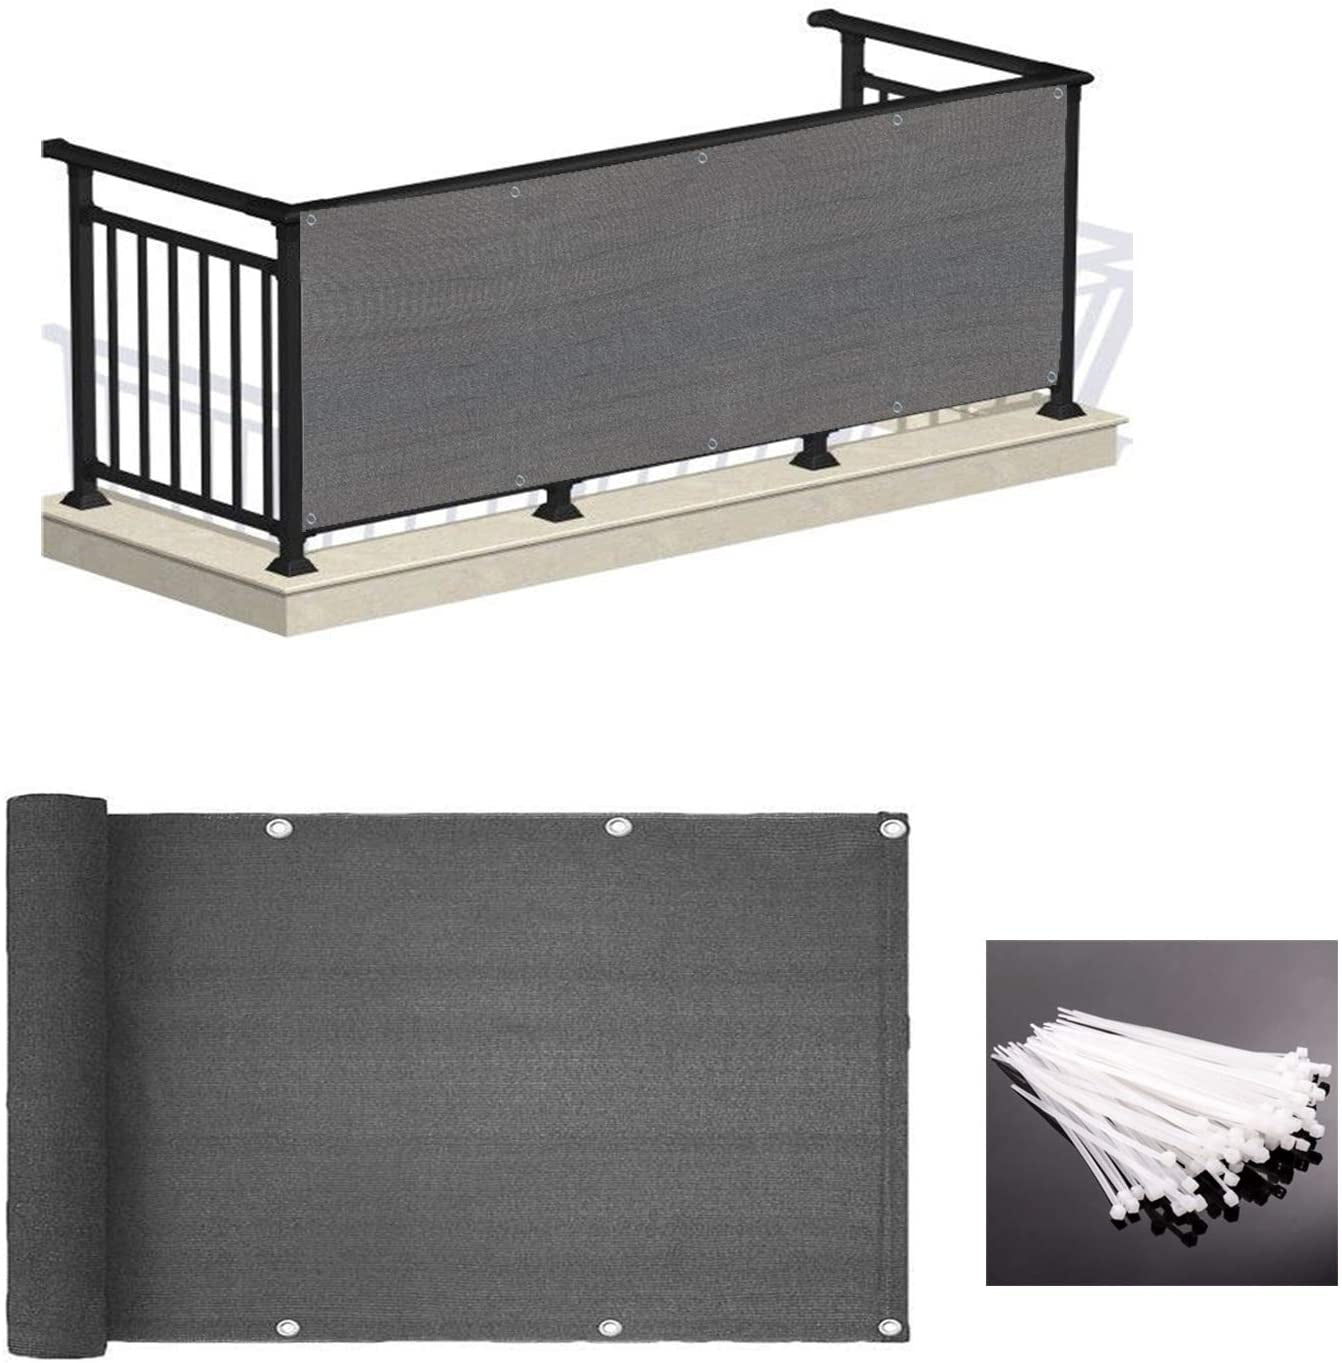 LOVE STORY, LOVE STORY 3' X 10' Grey Balcony Screen Privacy Fence Cover UV Protection Weather-Resistant 3 FT Height Shield for Deck, Patio, Backyard, Outdoor Pool, Porch, Railing